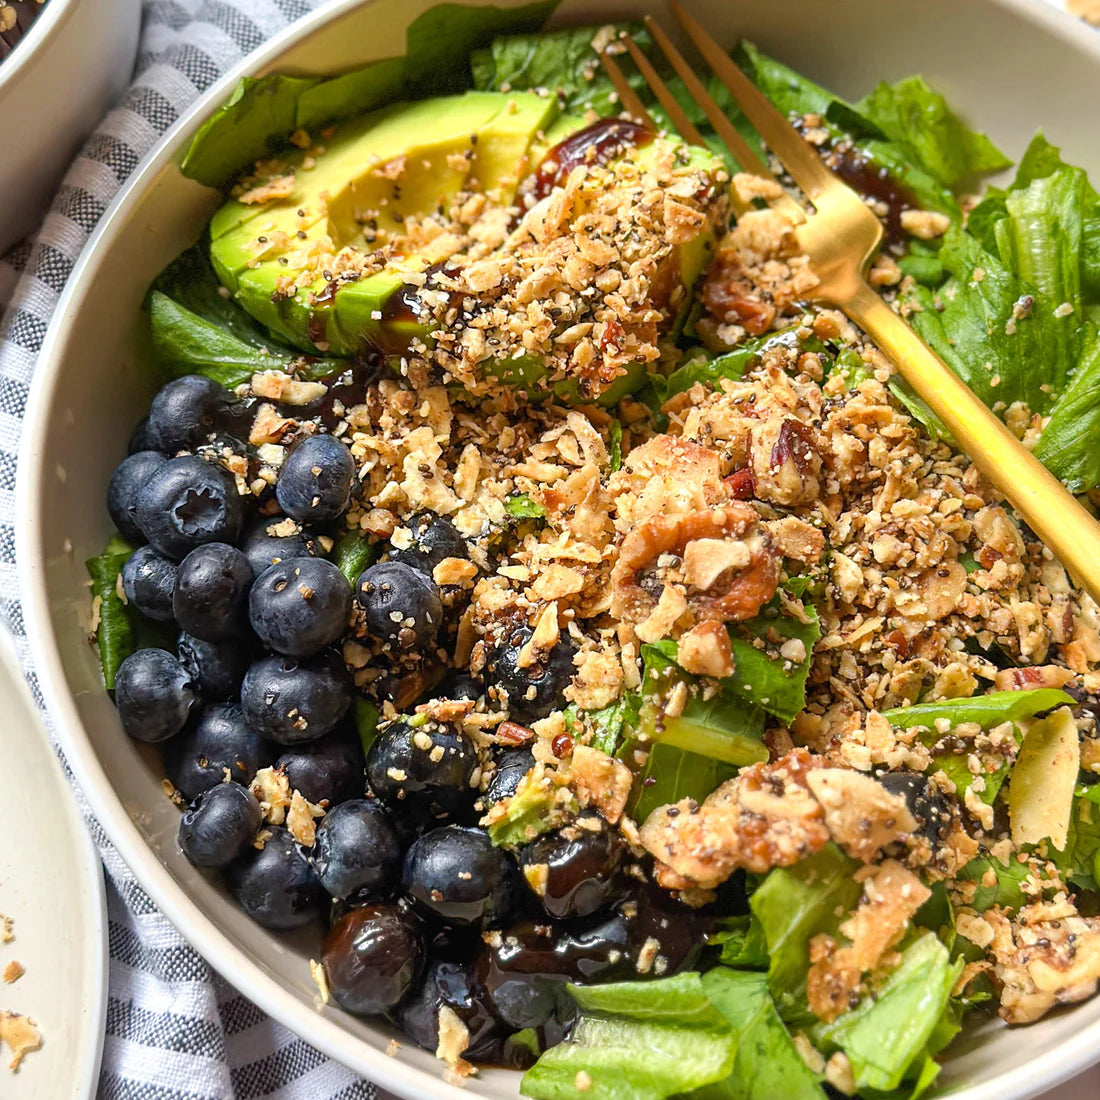 A bowl of plant-based summer crunch salad made with avocado, blueberries, leafy greens and Struesli's organic granola.